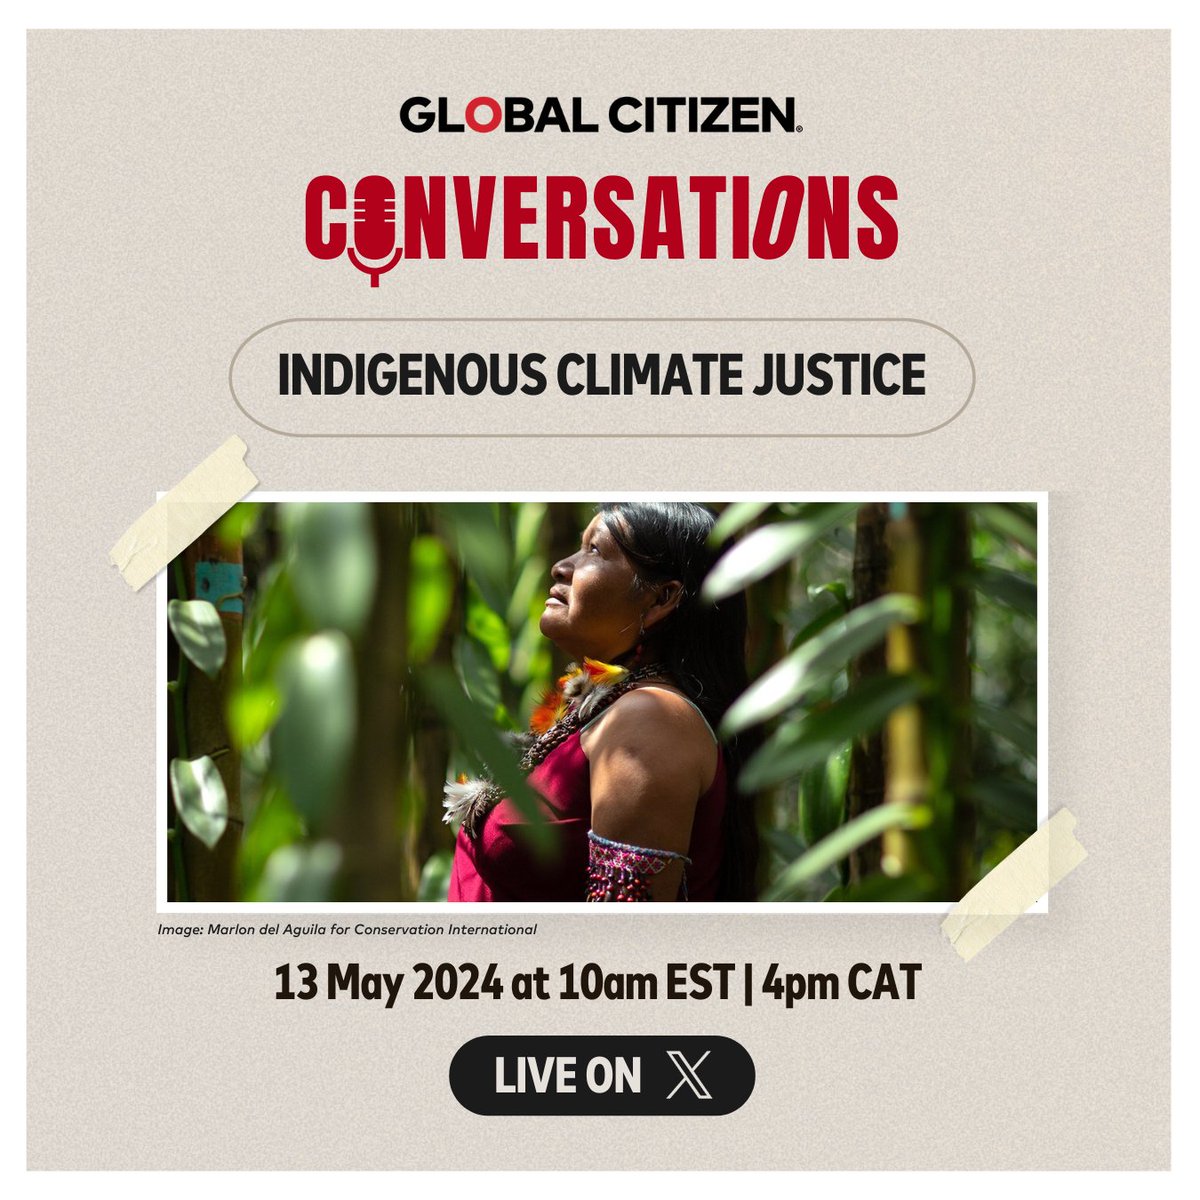 For too long, Indigenous voices have been silenced in climate conversations⛔️. Let's change that! 📻Tune in on May 13 as @GlblCtzn discusses the complexities of environmental challenges faced by Indigenous communities & the need for direct participation in climate negotiations.…